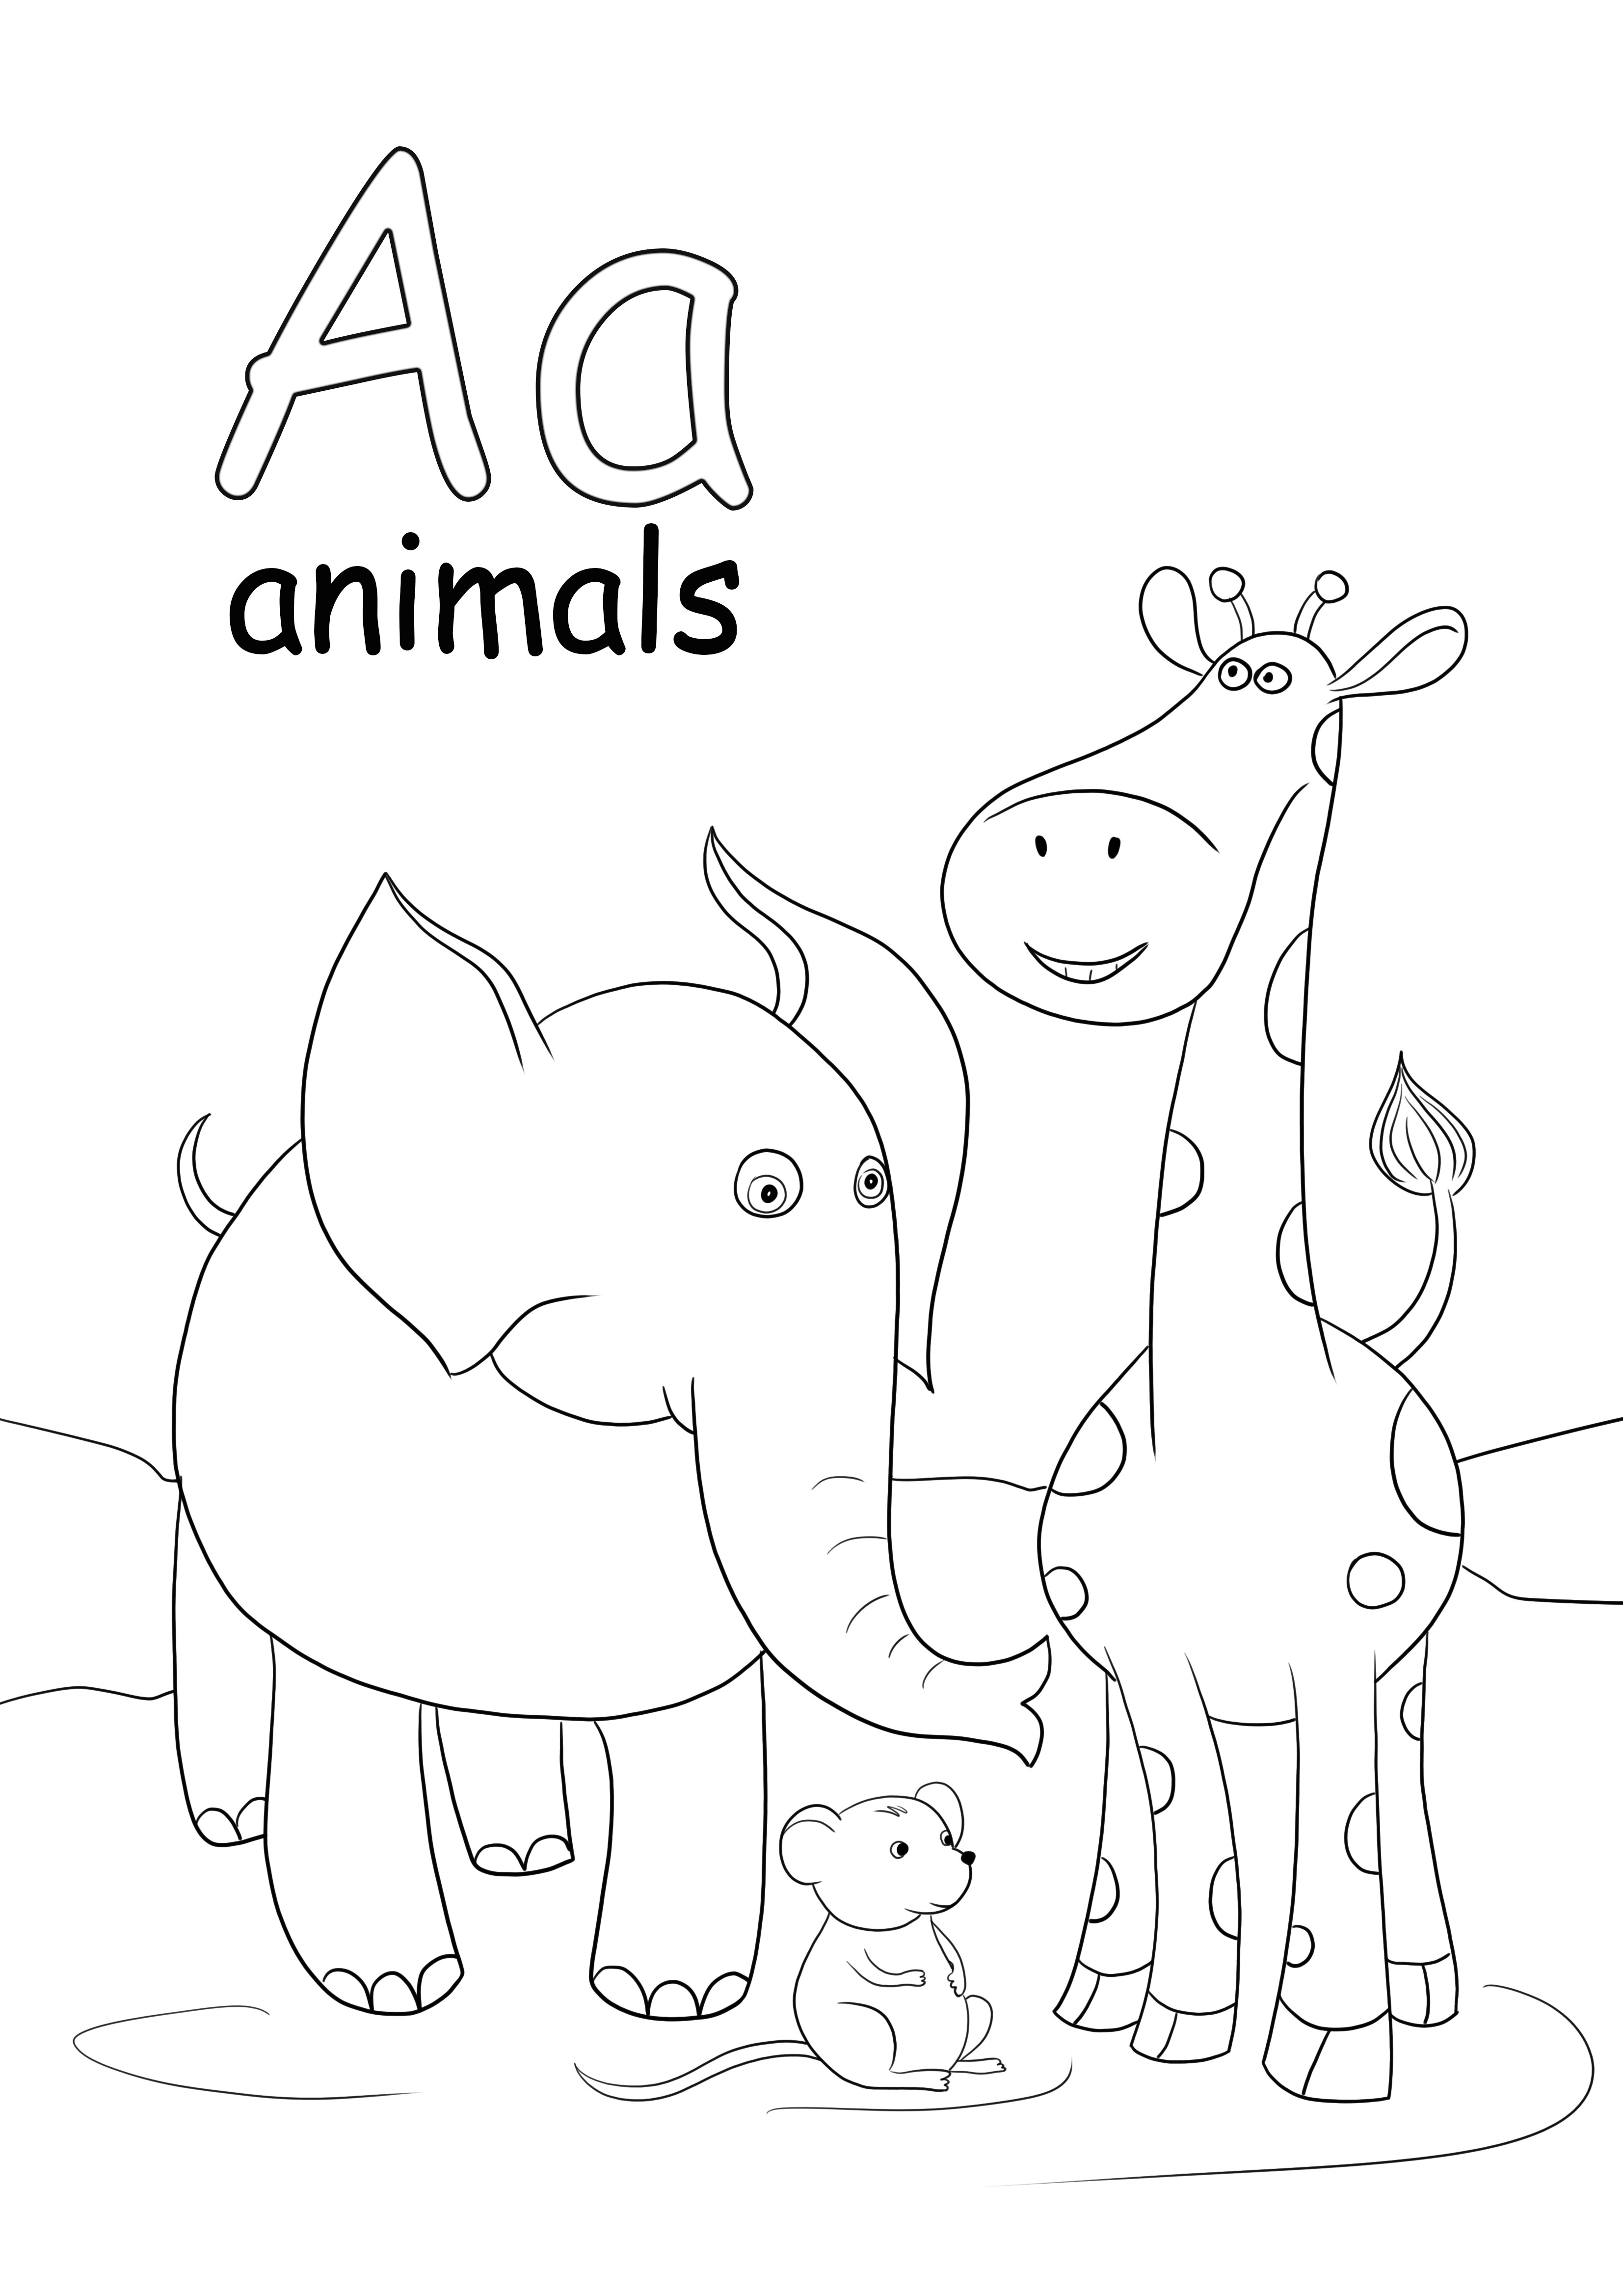 Letter A is for animals coloring and free printing sheet